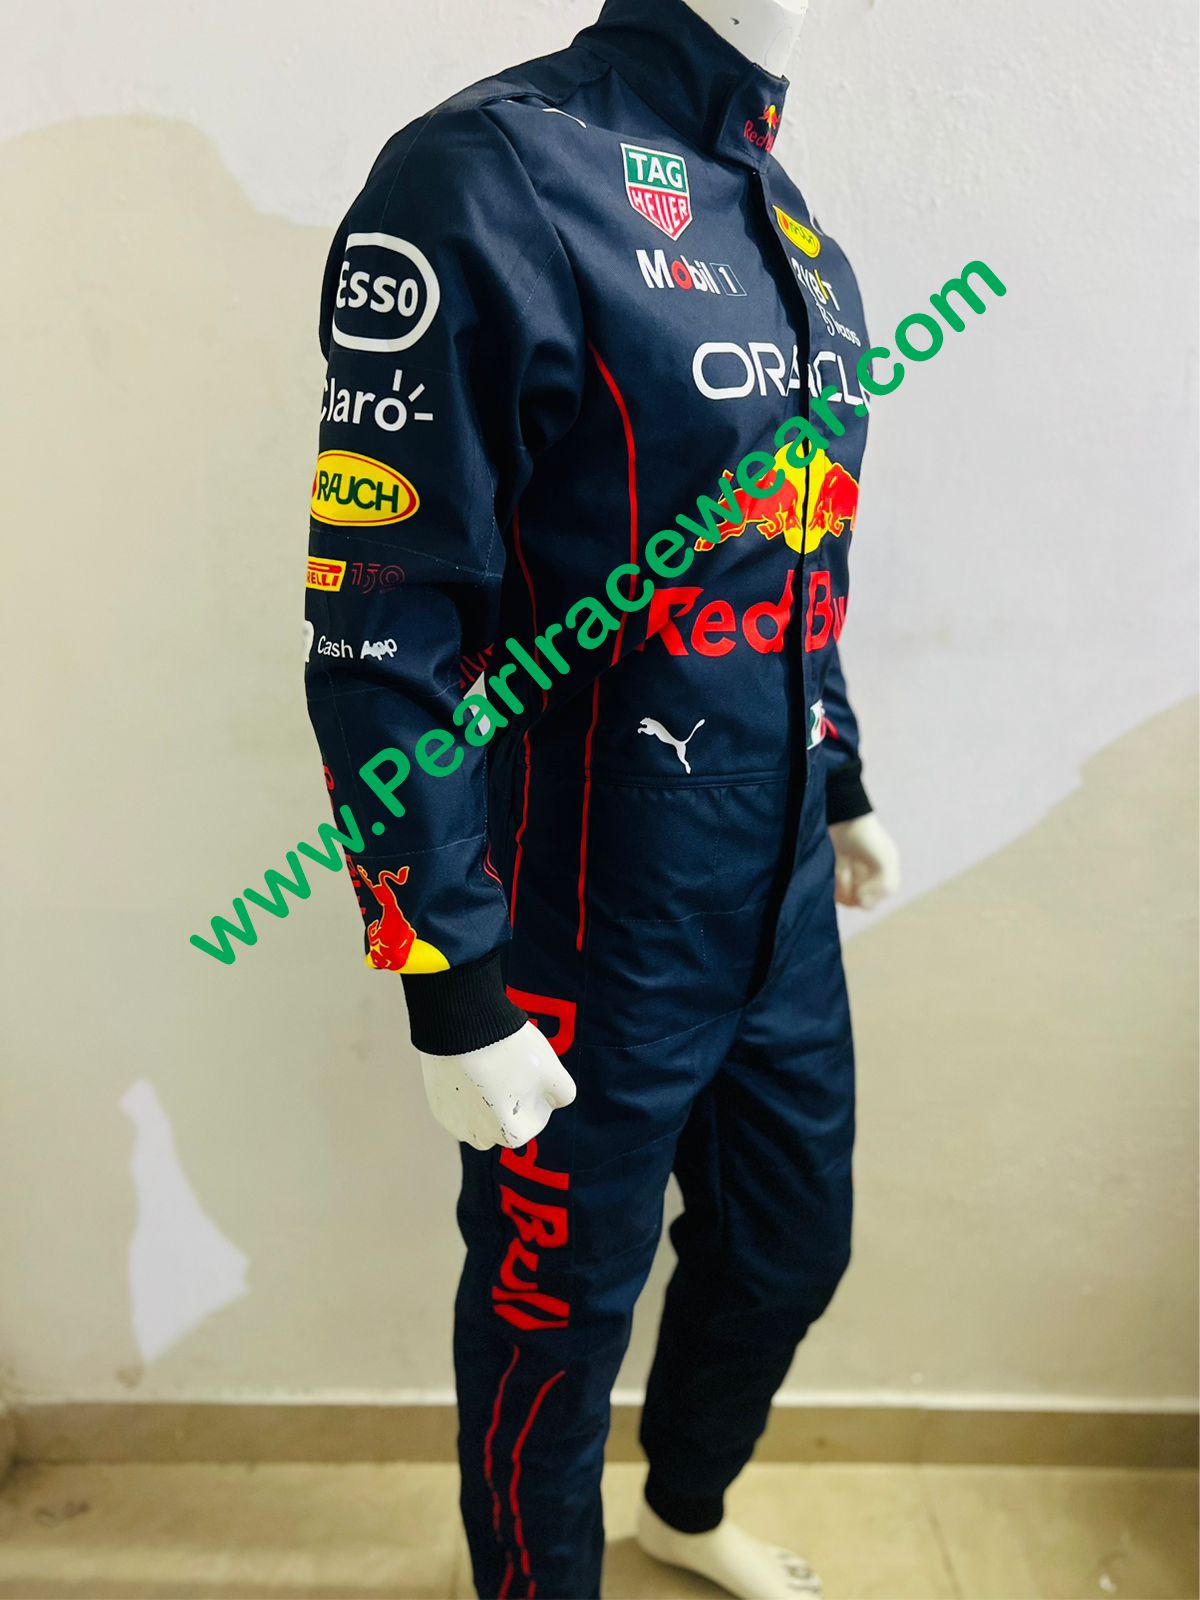 Red Bull F1, 2022 specification racing suit